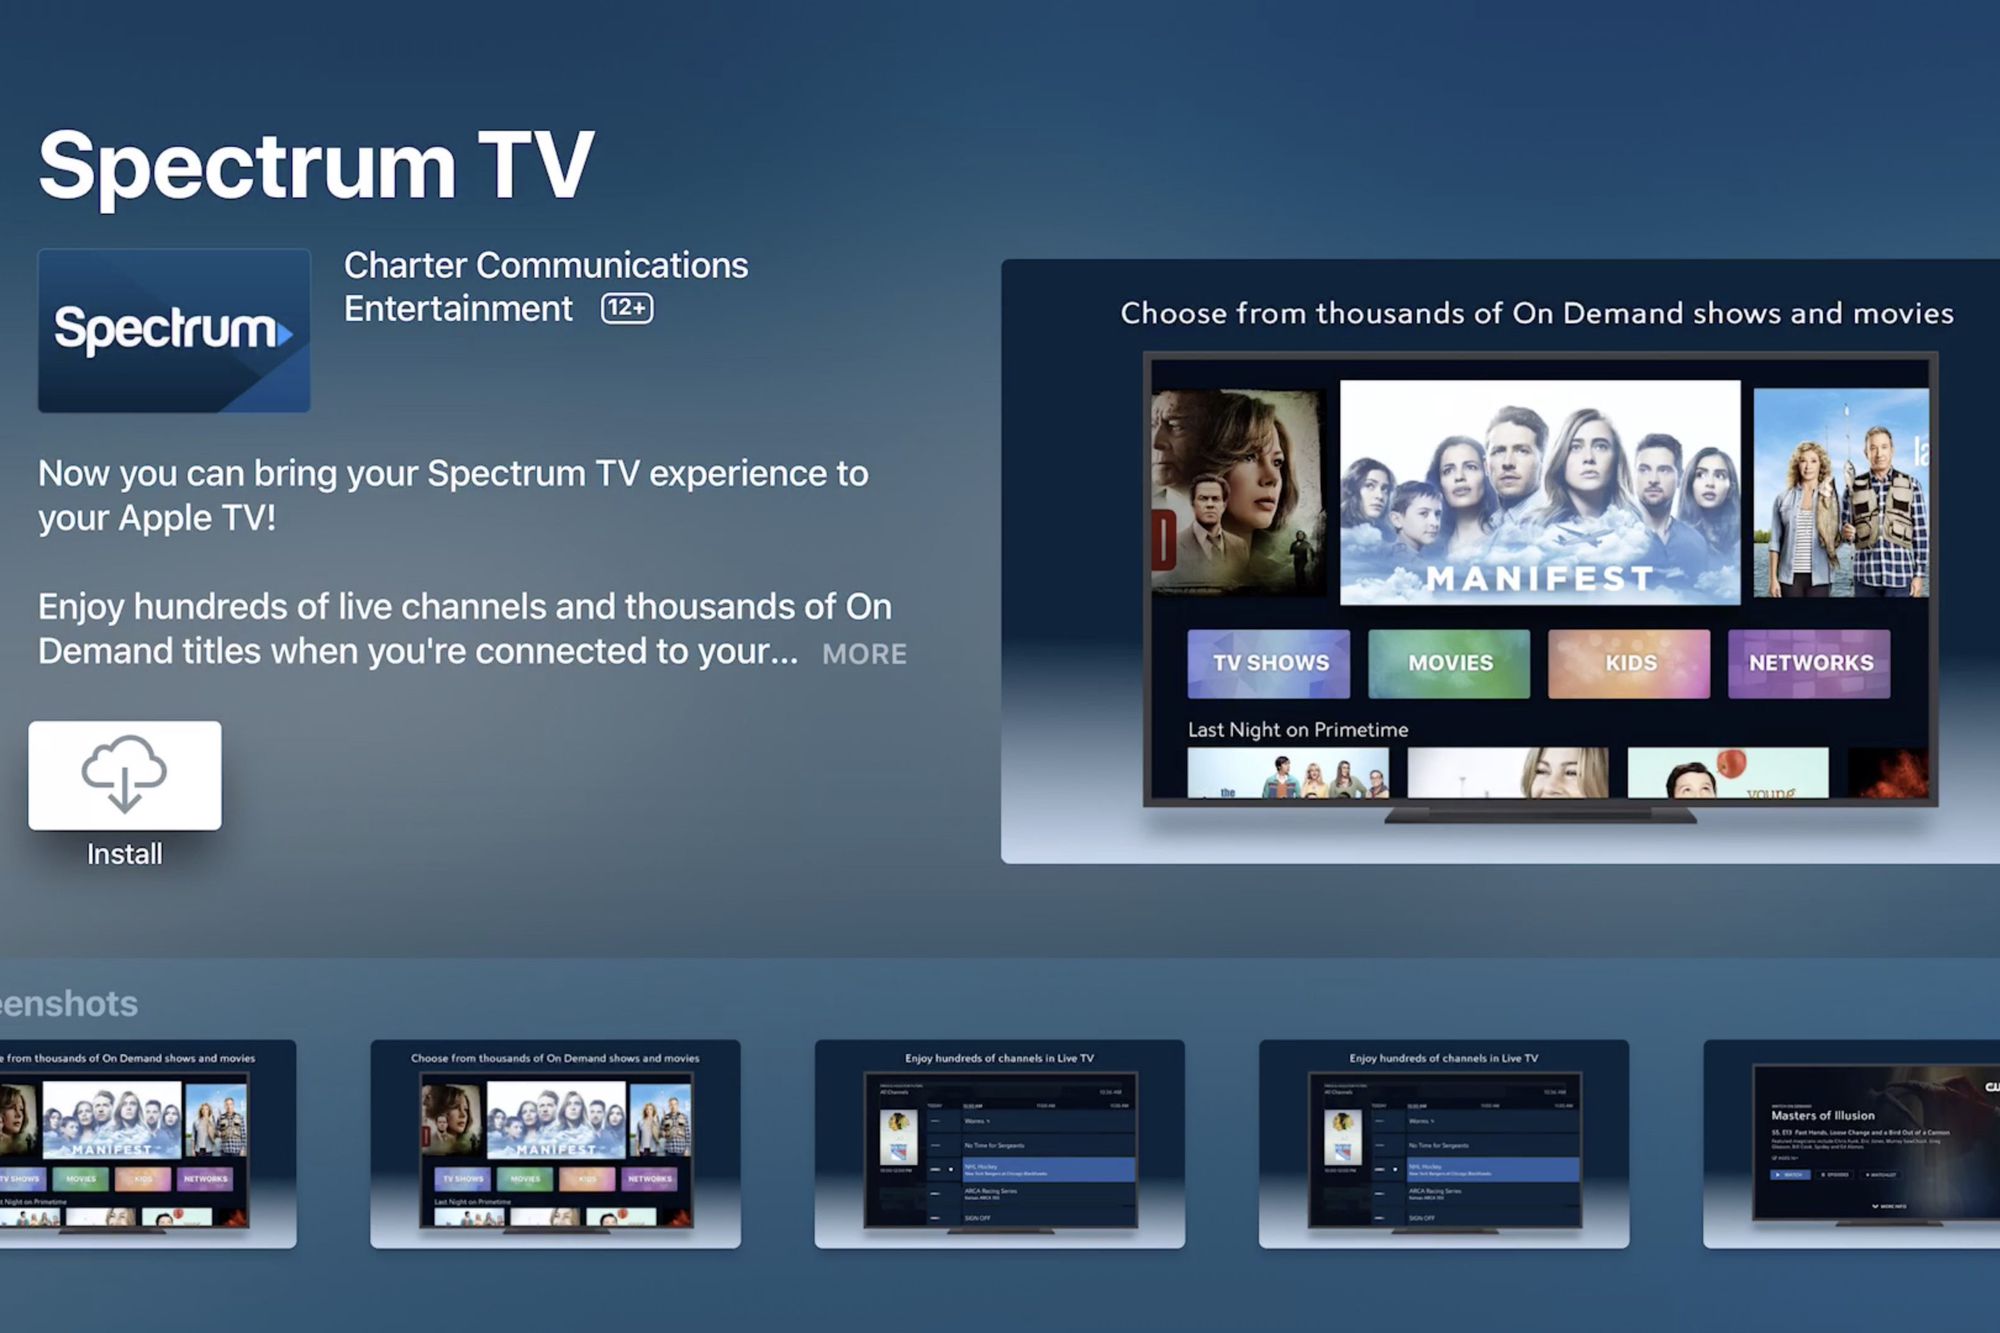 How Do You Get on Demand on Spectrum